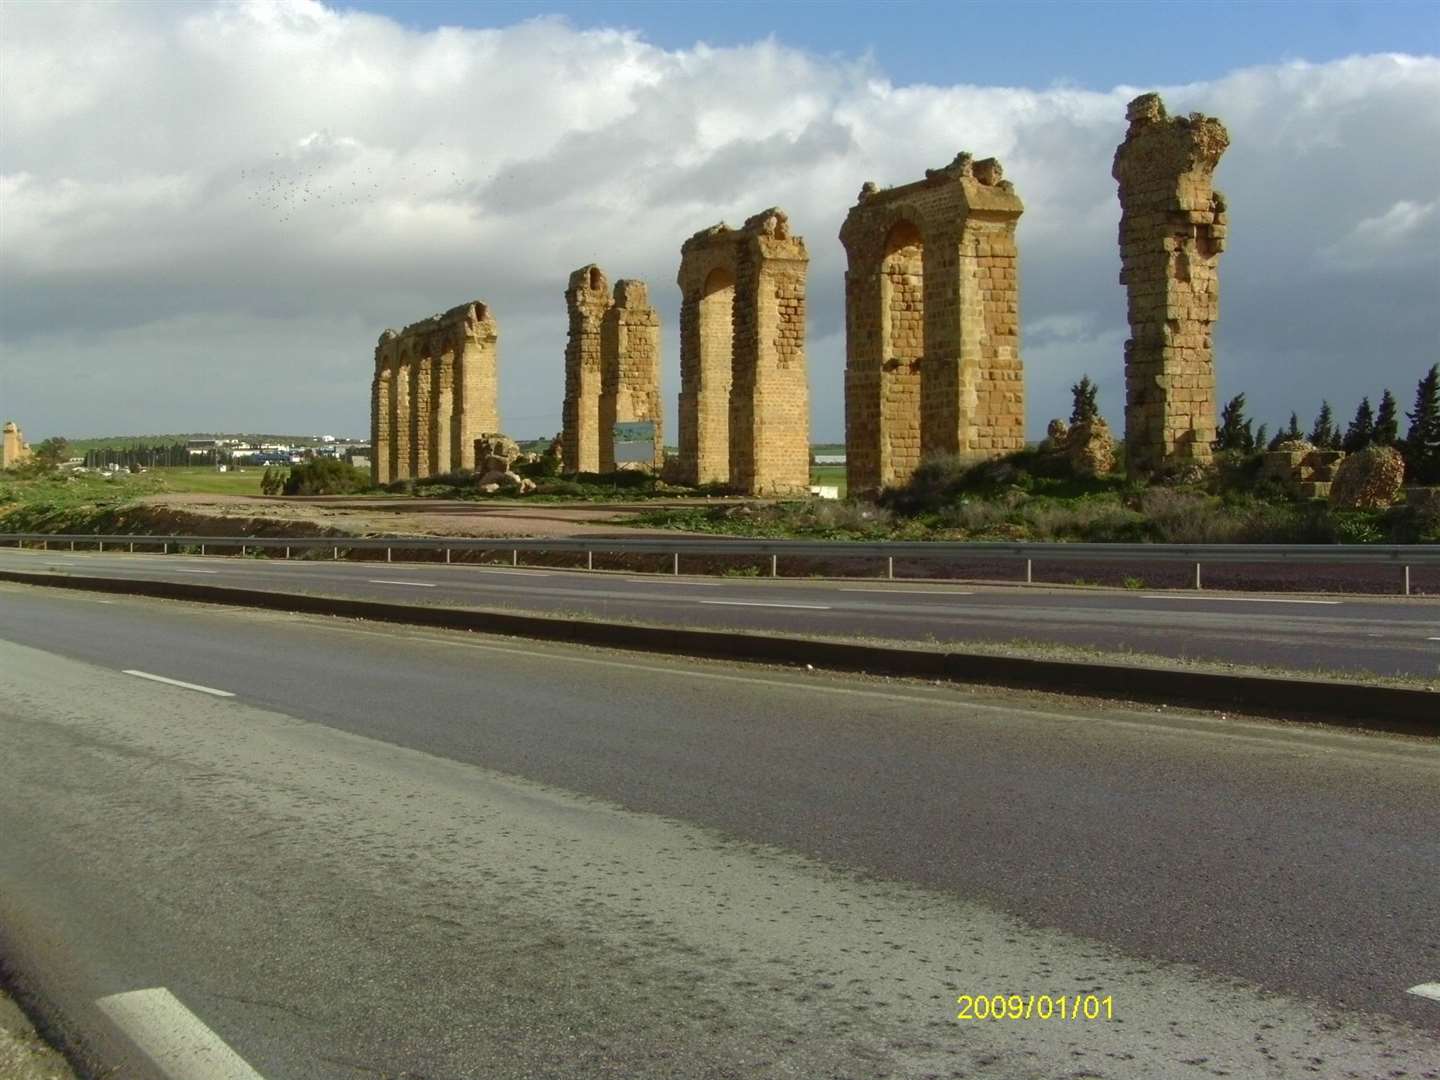 The remains of a Roman aqueduct in Tunisia